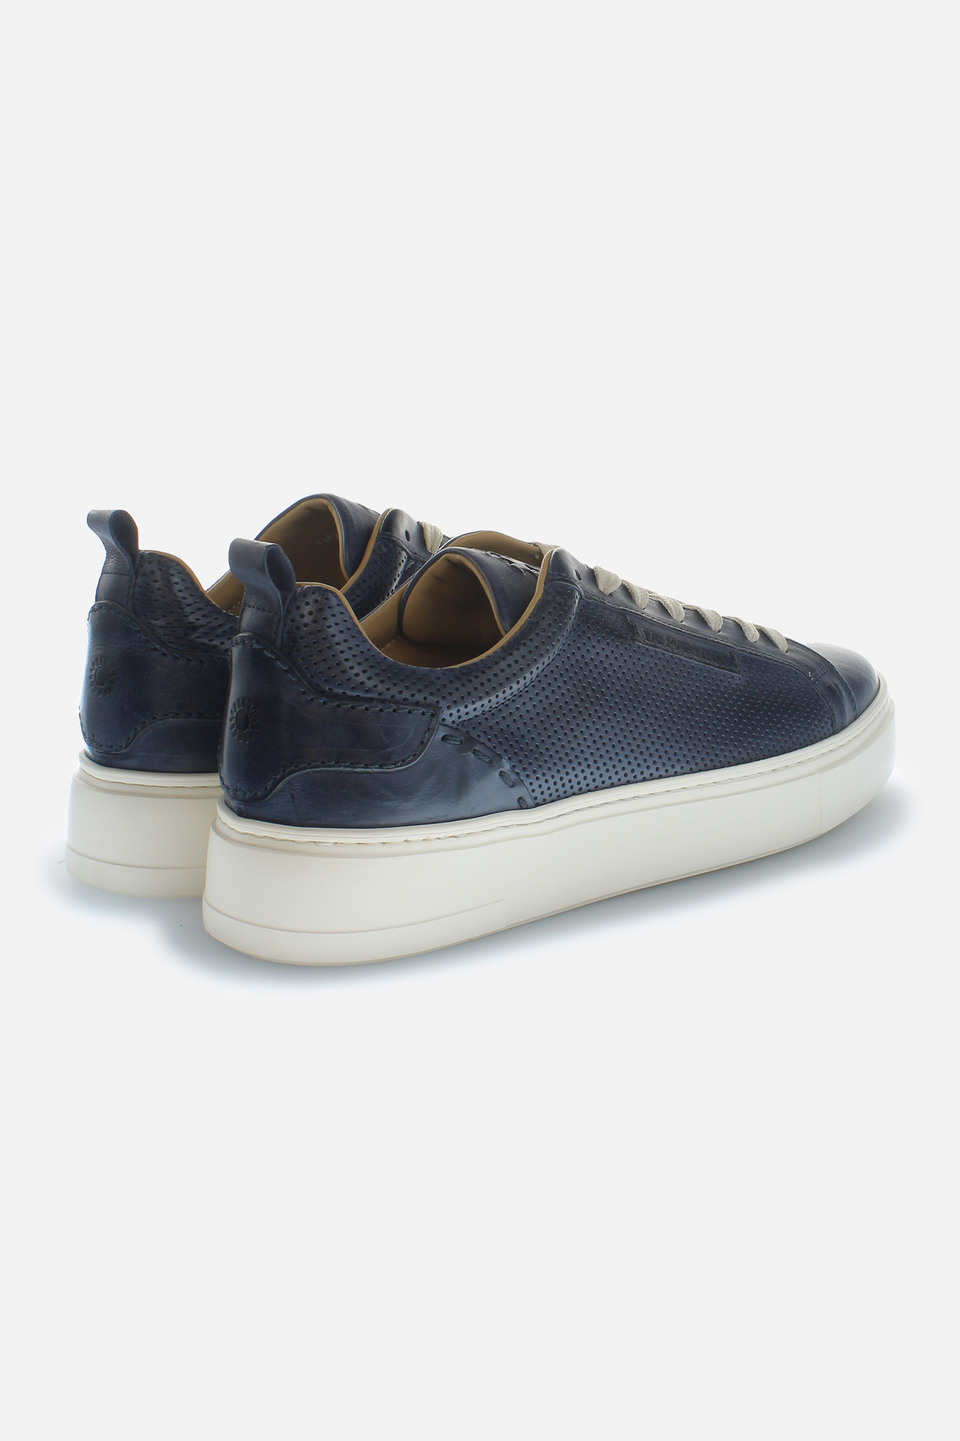 Openwork leather trainers | La Martina - Official Online Shop